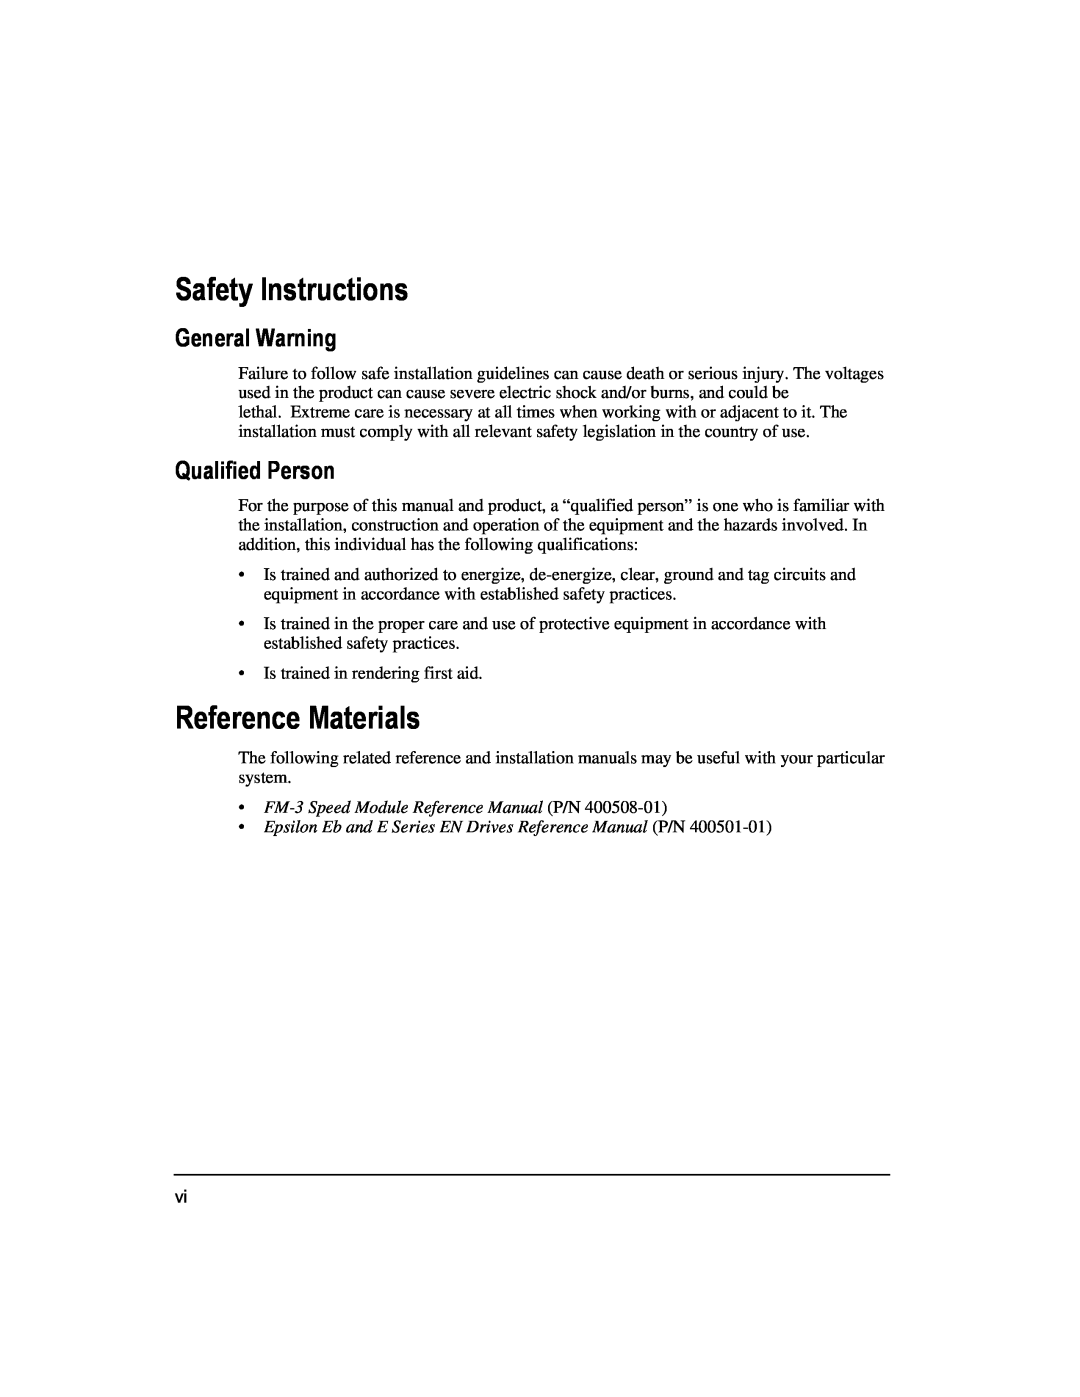 Emerson 400508-02 installation manual Safety Instructions, Reference Materials, General Warning, Qualified Person 